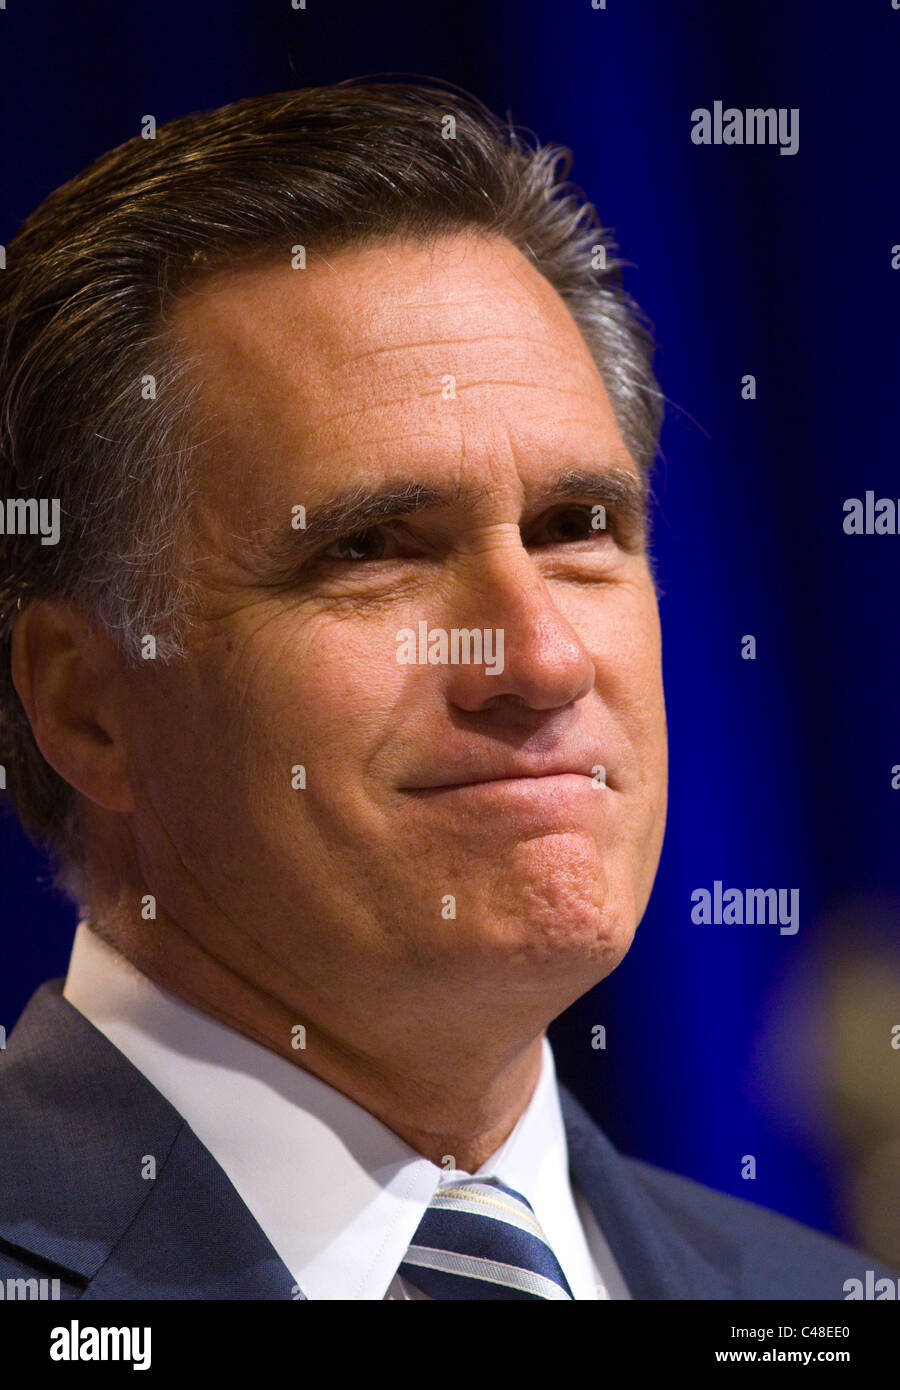 Republican Presidential candidate Mitt Romney at the  CPAC conference in Washington, DC Stock Photo